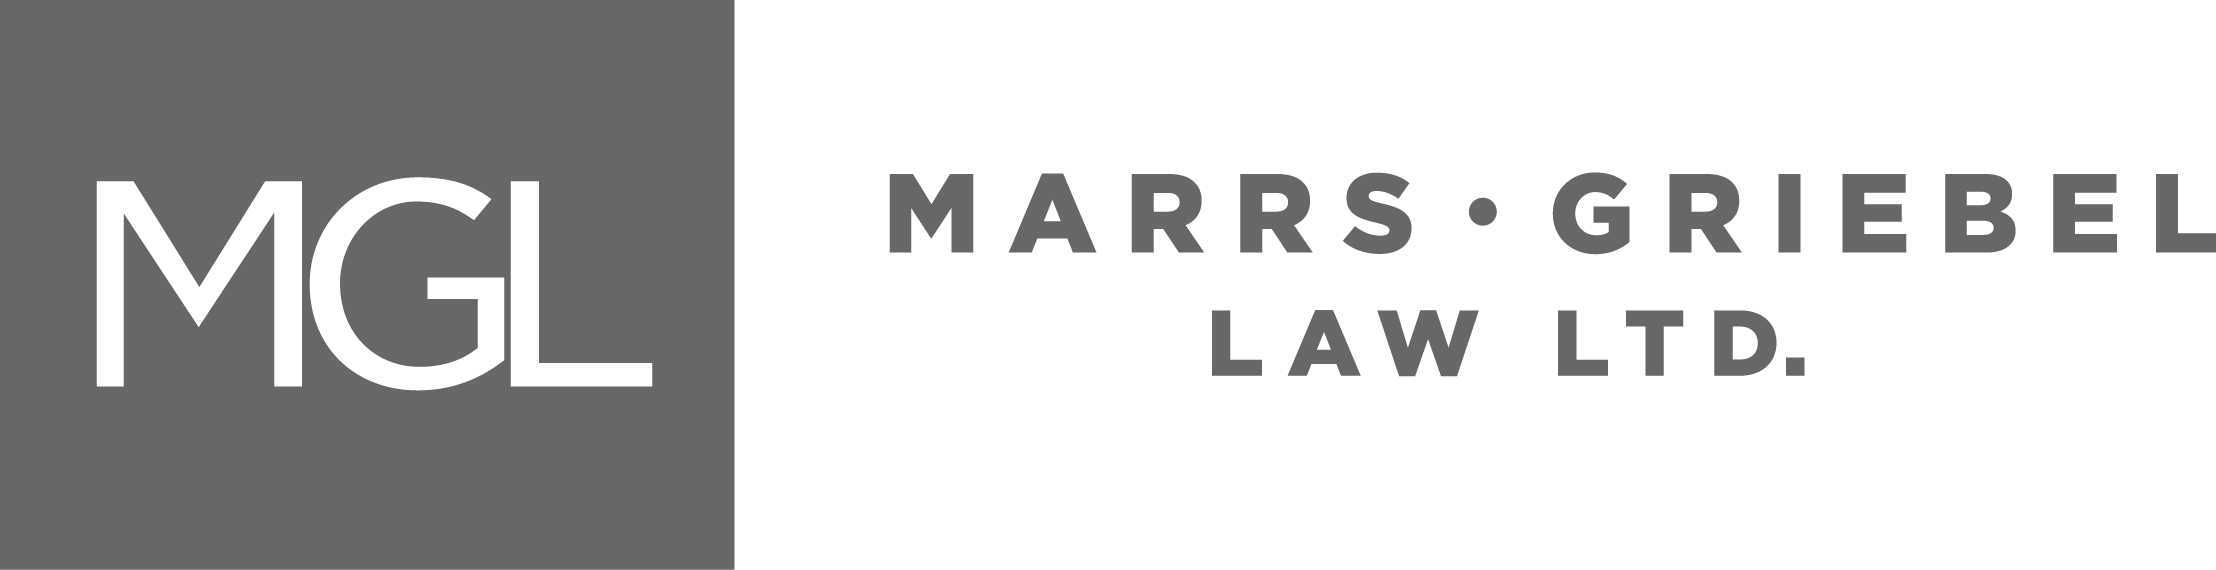 Marrs Griebel Law